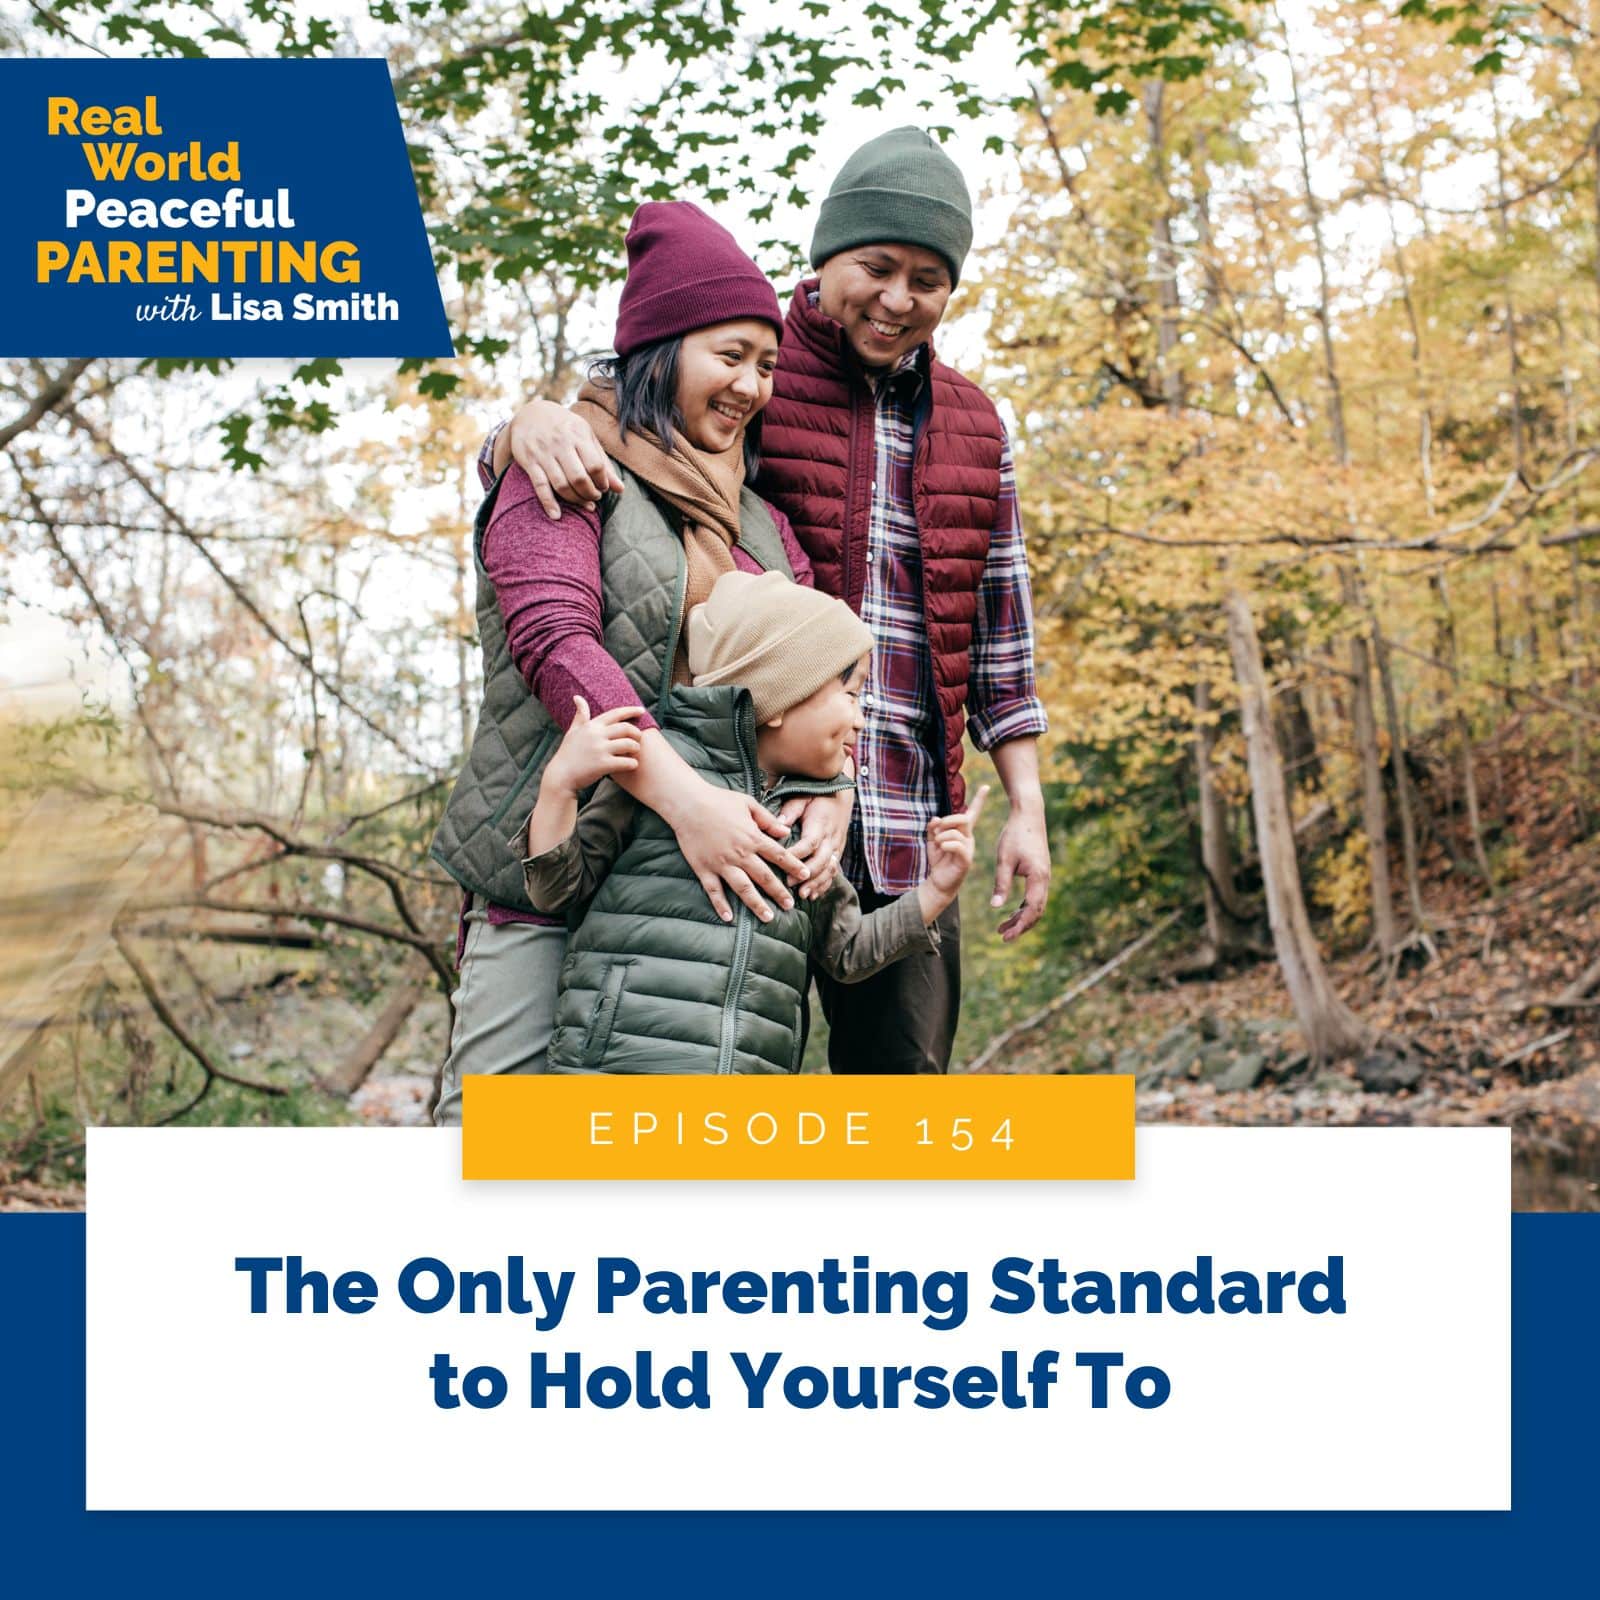 Real World Peaceful Parenting with Lisa Smith | The Only Parenting Standard to Hold Yourself To